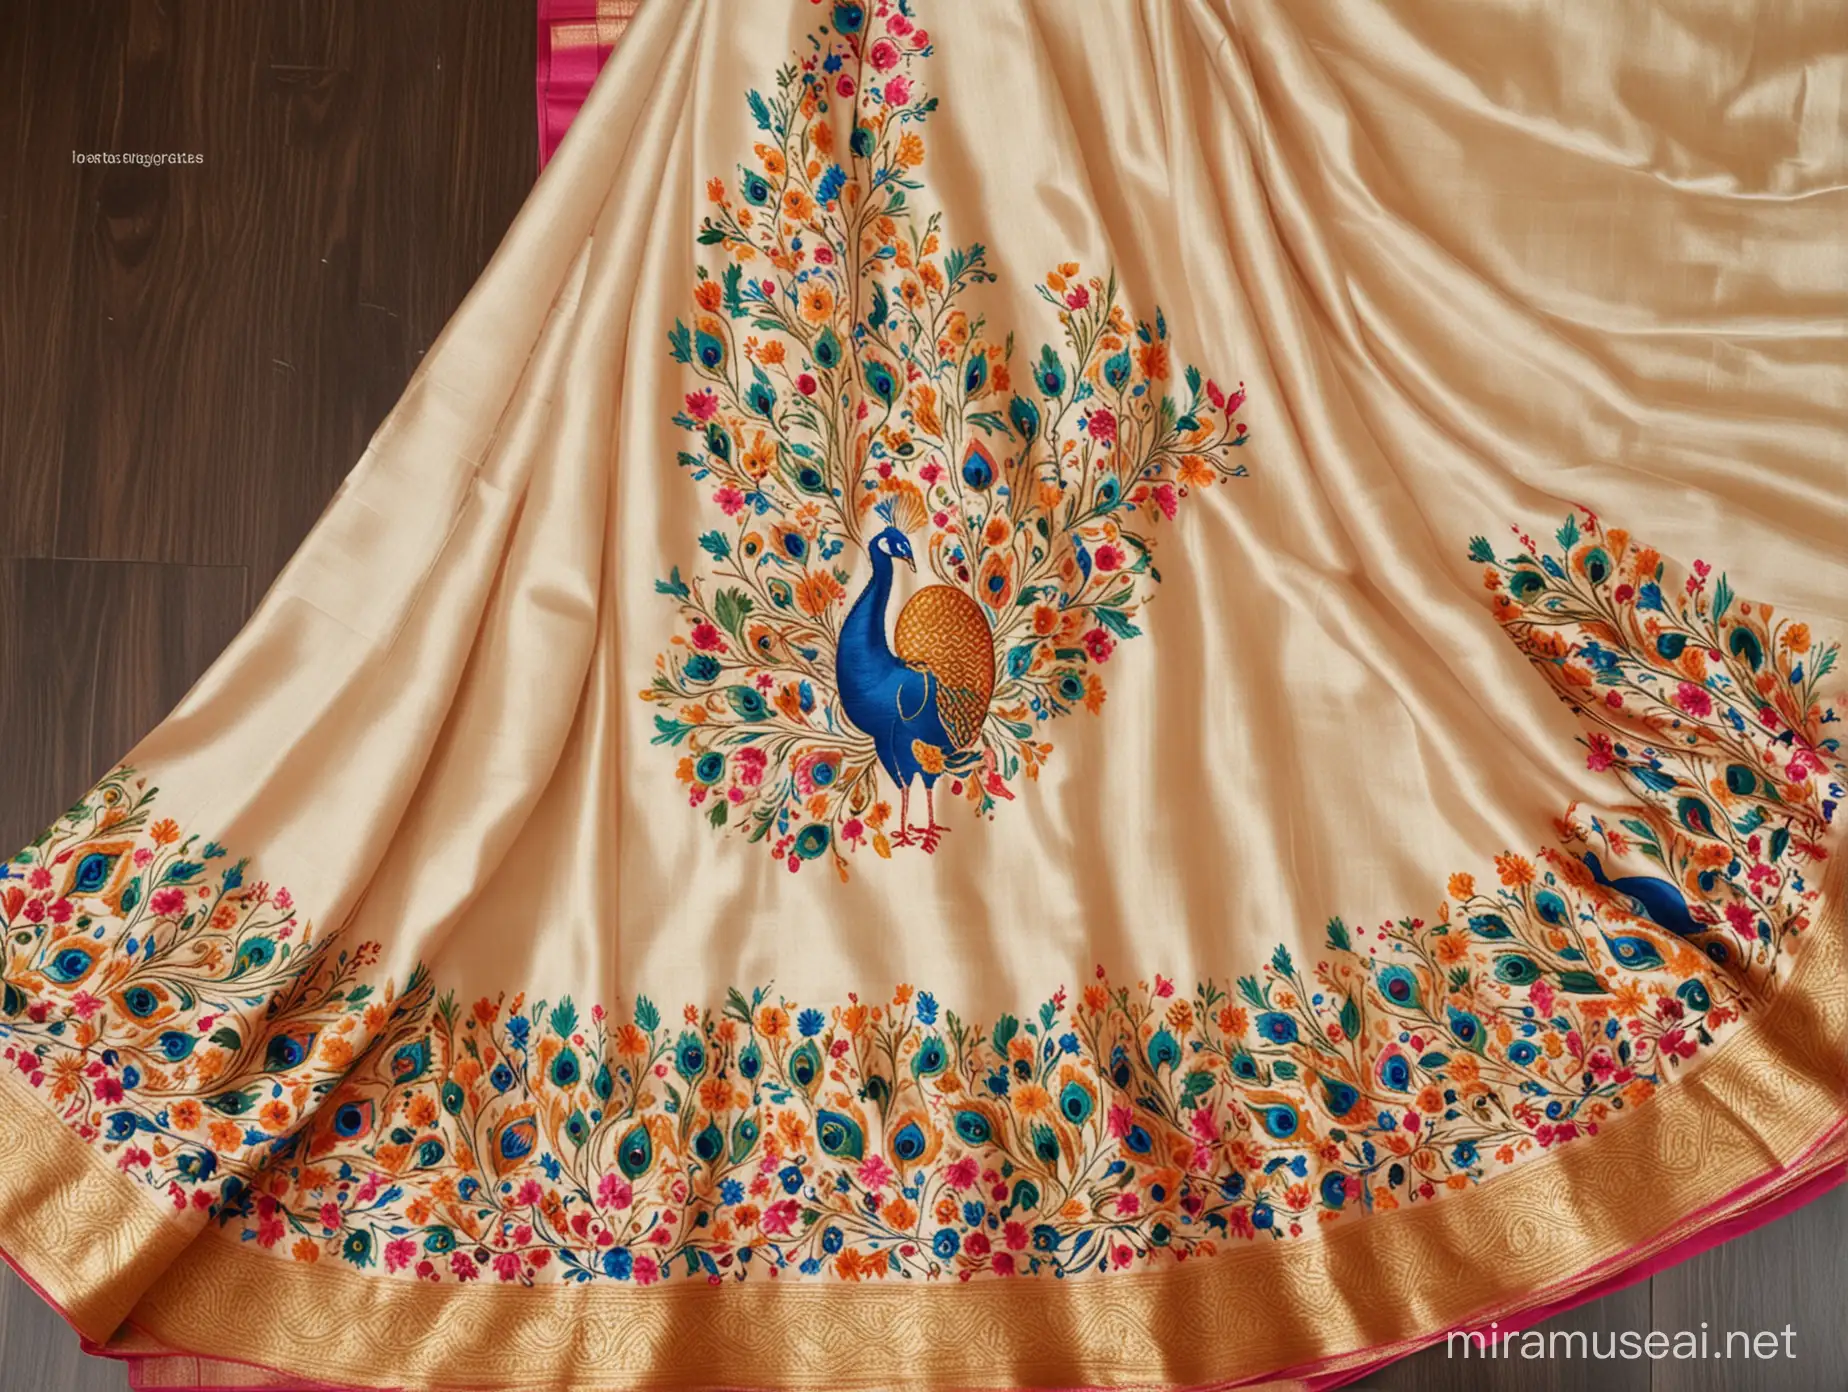 Exquisite Paithani Saree with Intricate Peacock Embroidery